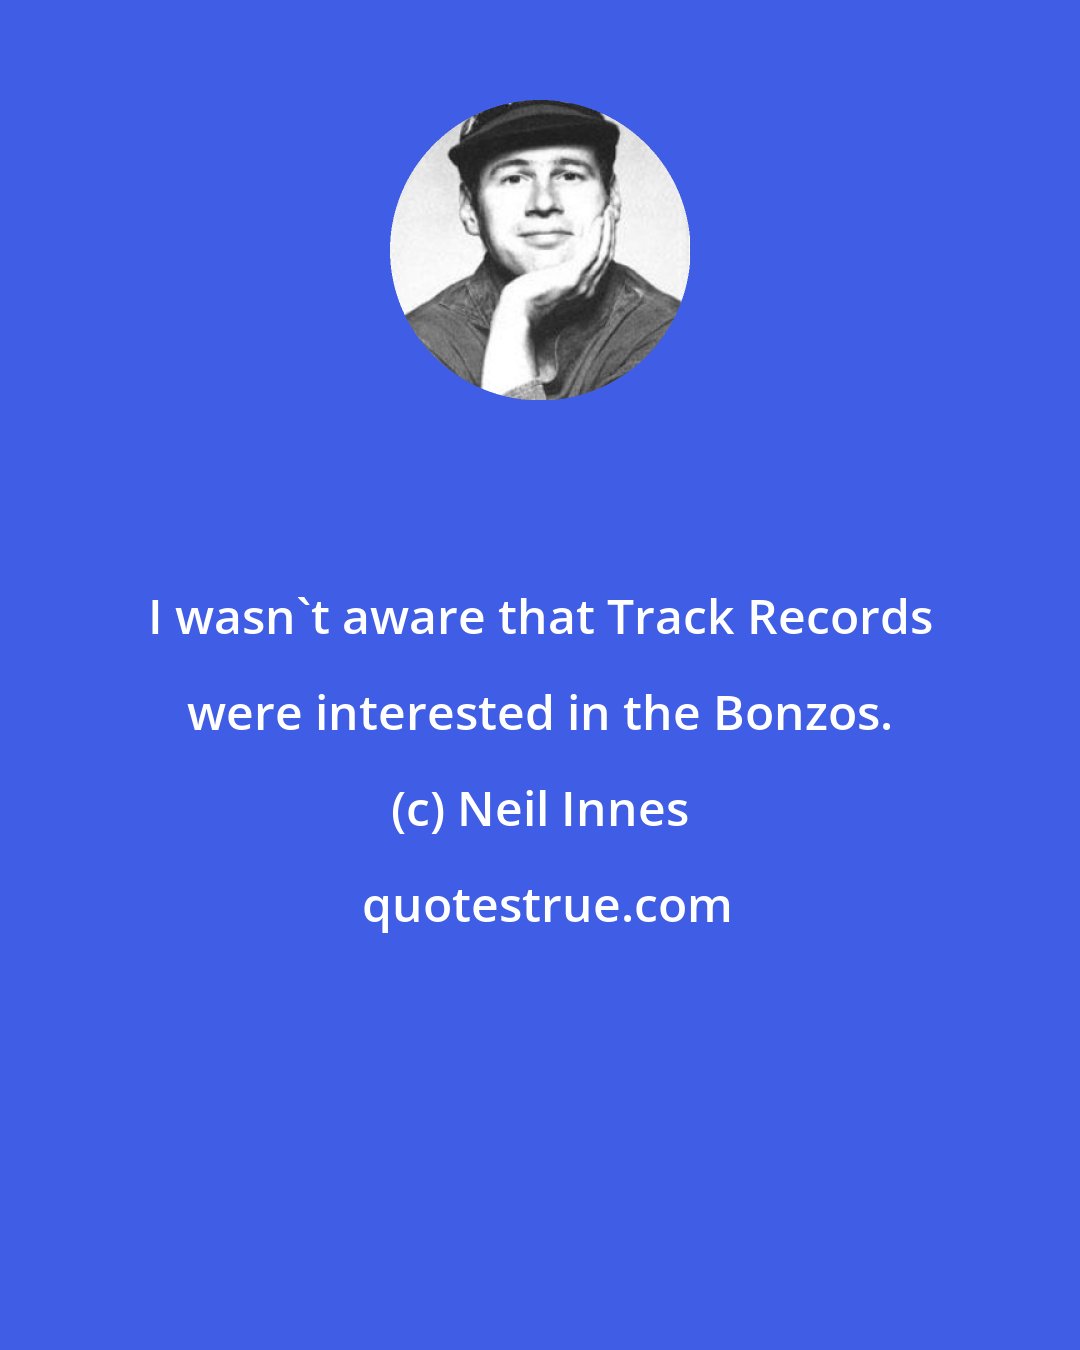 Neil Innes: I wasn't aware that Track Records were interested in the Bonzos.